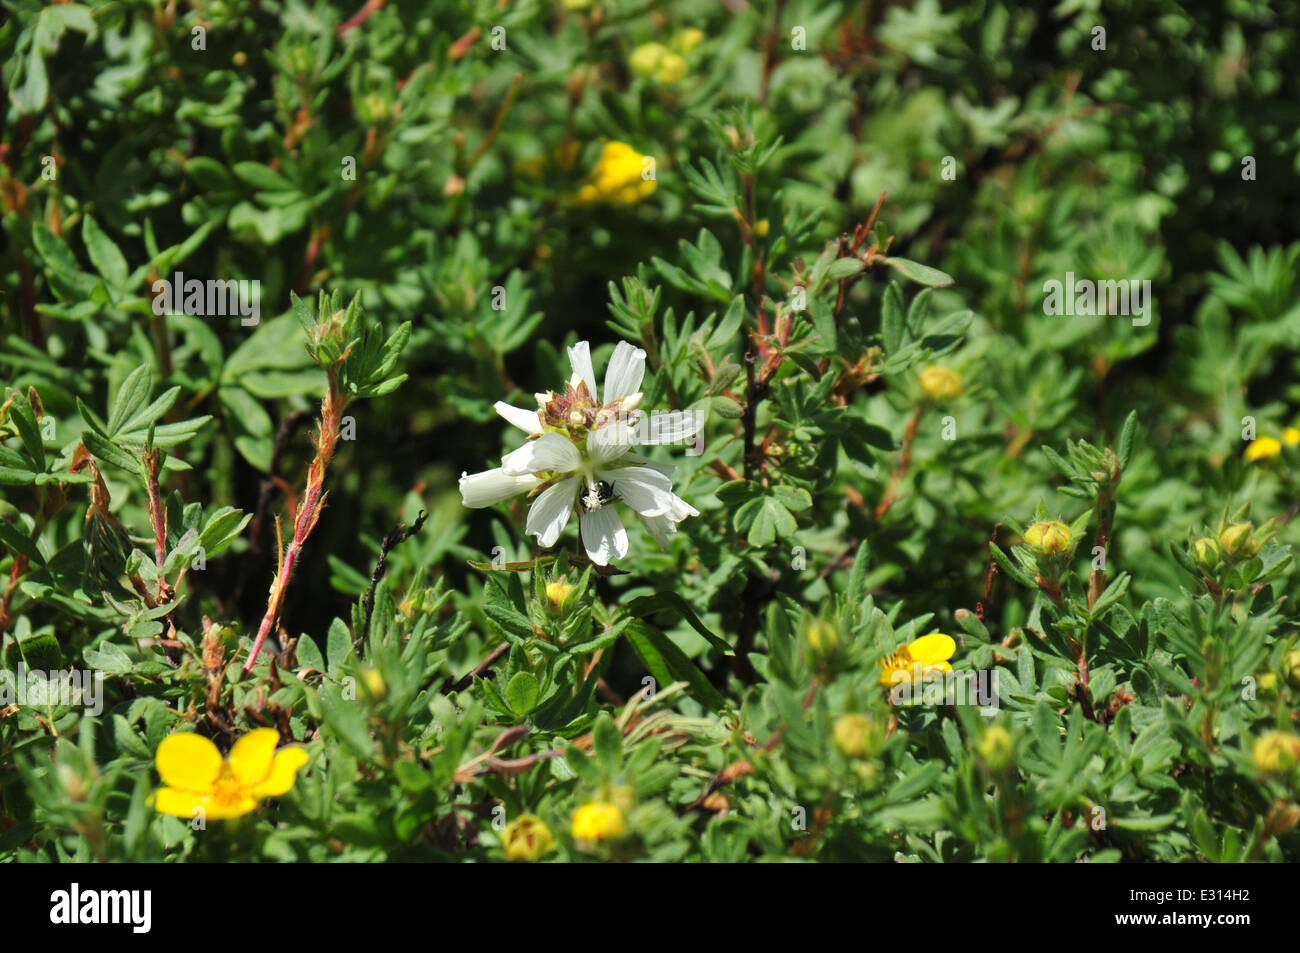 fly on white flower among a yellow flowered bush Stock Photo